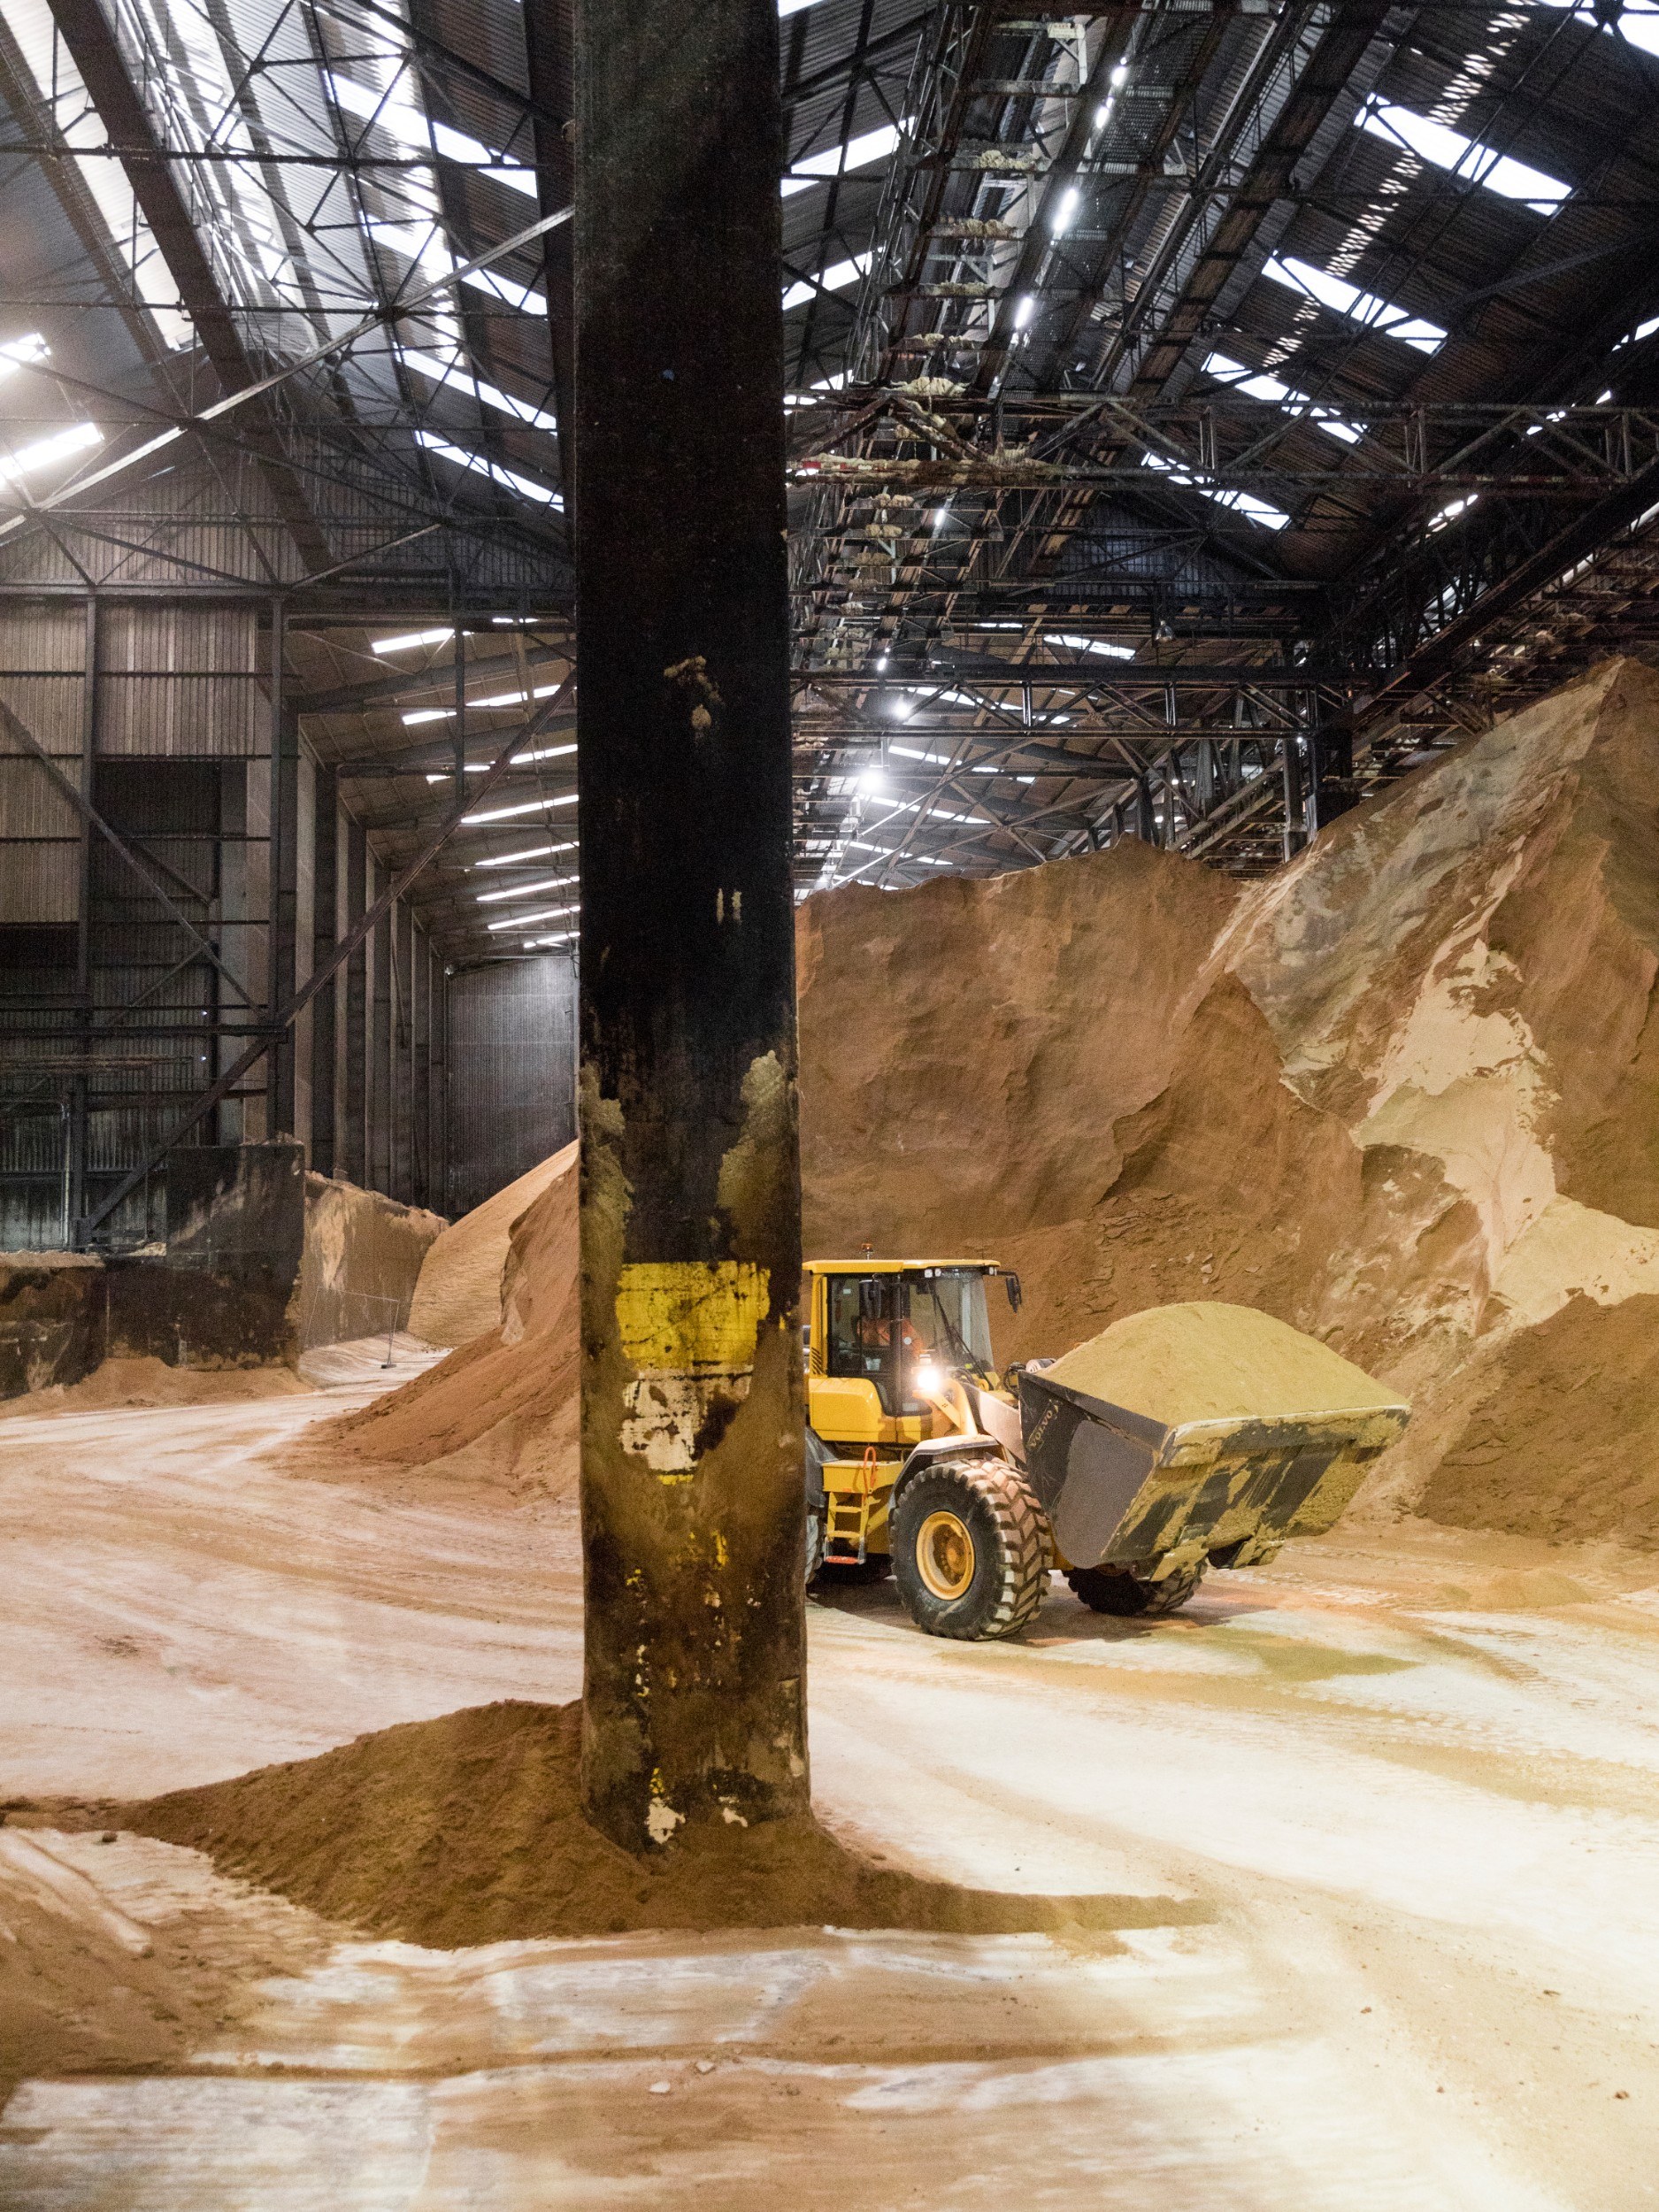 Mounds of sugar several storeys high in a warehouse with a digger moving it around